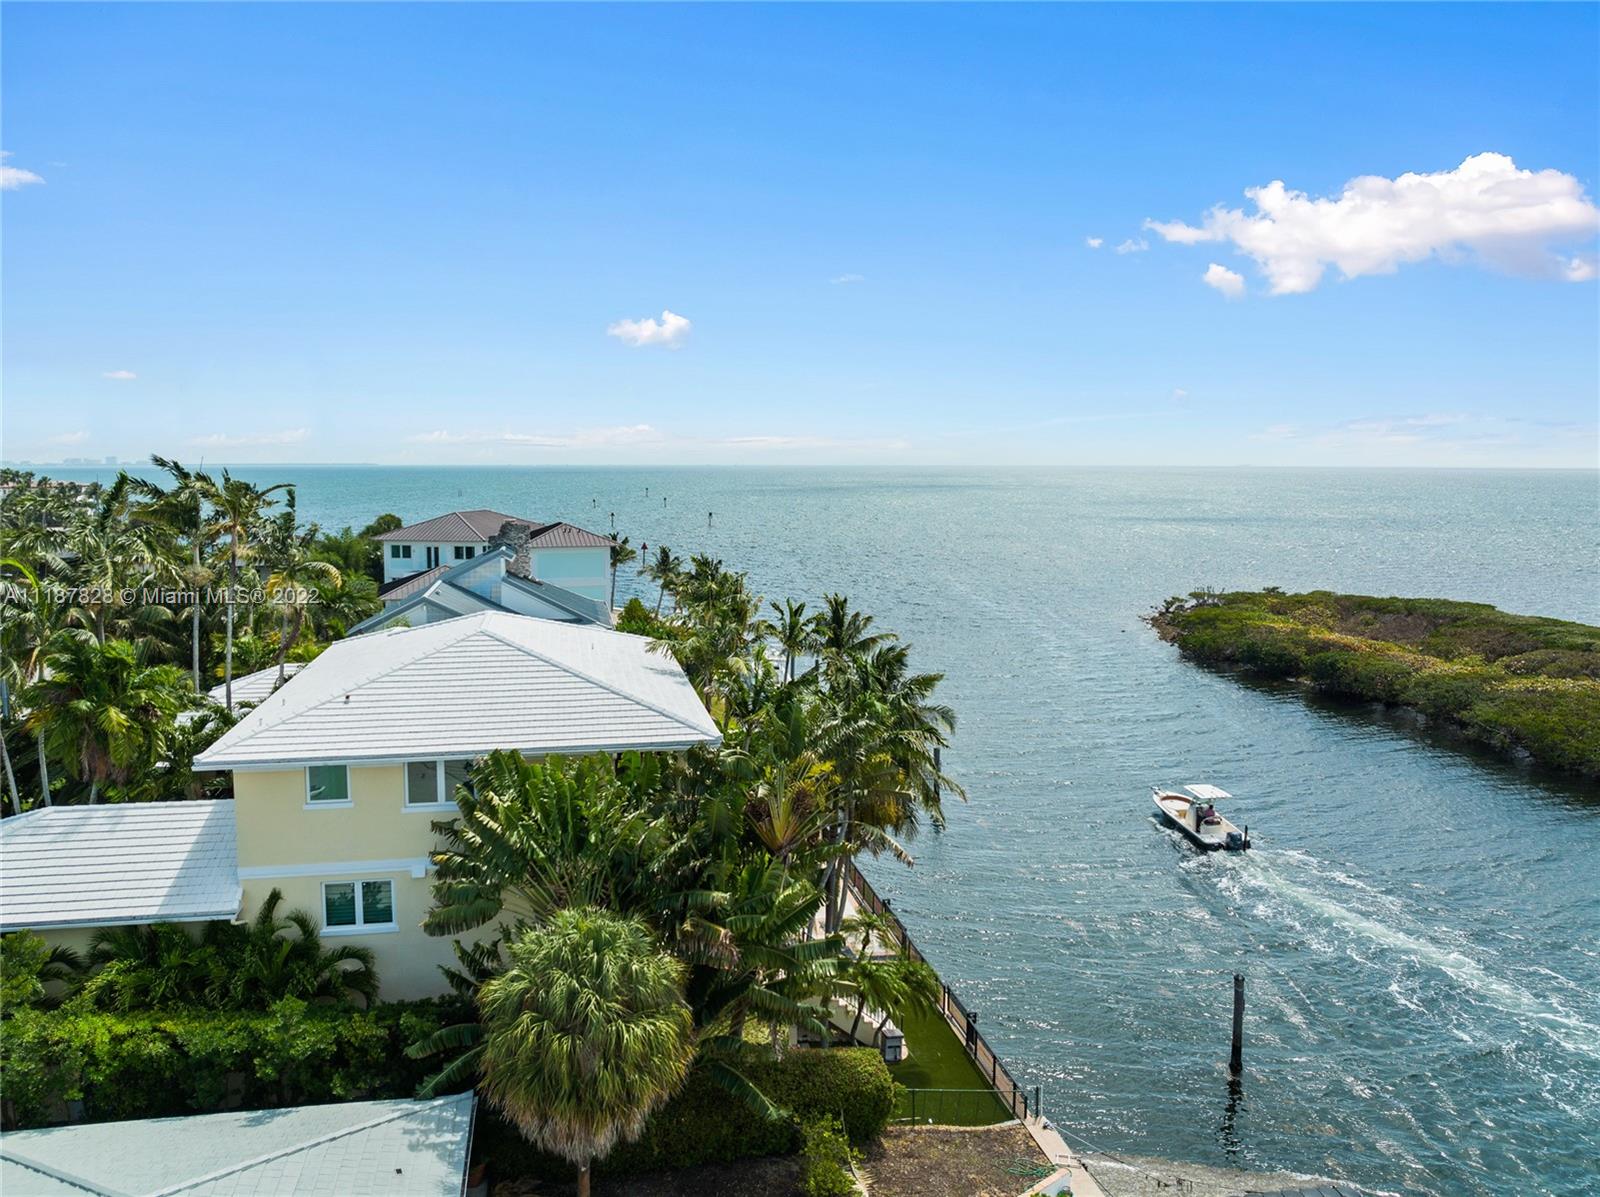 YOU CAN SEE FOREVER ! SELLER FINANCING IS AVAILABLE! WATERFRONT VILLA WITH INCREDIBLE OCEAN VIEWS from all Stories of the house.Direct Ocean Access and No Bridges to Bay.100 Foot Seawall. Saltwater Heated Pool. 3rd house from point. All impact Glass. 2 Car garage. Incredible Home Theater. Ground Floor Entertainment room off the pool with incredible full bar. 22 foot ceilings in the living room. marble and hardwood floors. Fully modern kitchen. House has lots of balconies and terraces and lots of light.Hi ceilings in bedrooms.Watch the sunrise and sunset.Master bedroom suite complete with landing area perfect for office and stunning bathroom with ocean views and a large covered terrace perfect to wake up to and start your day with the ocean sunrise from your bedroom.